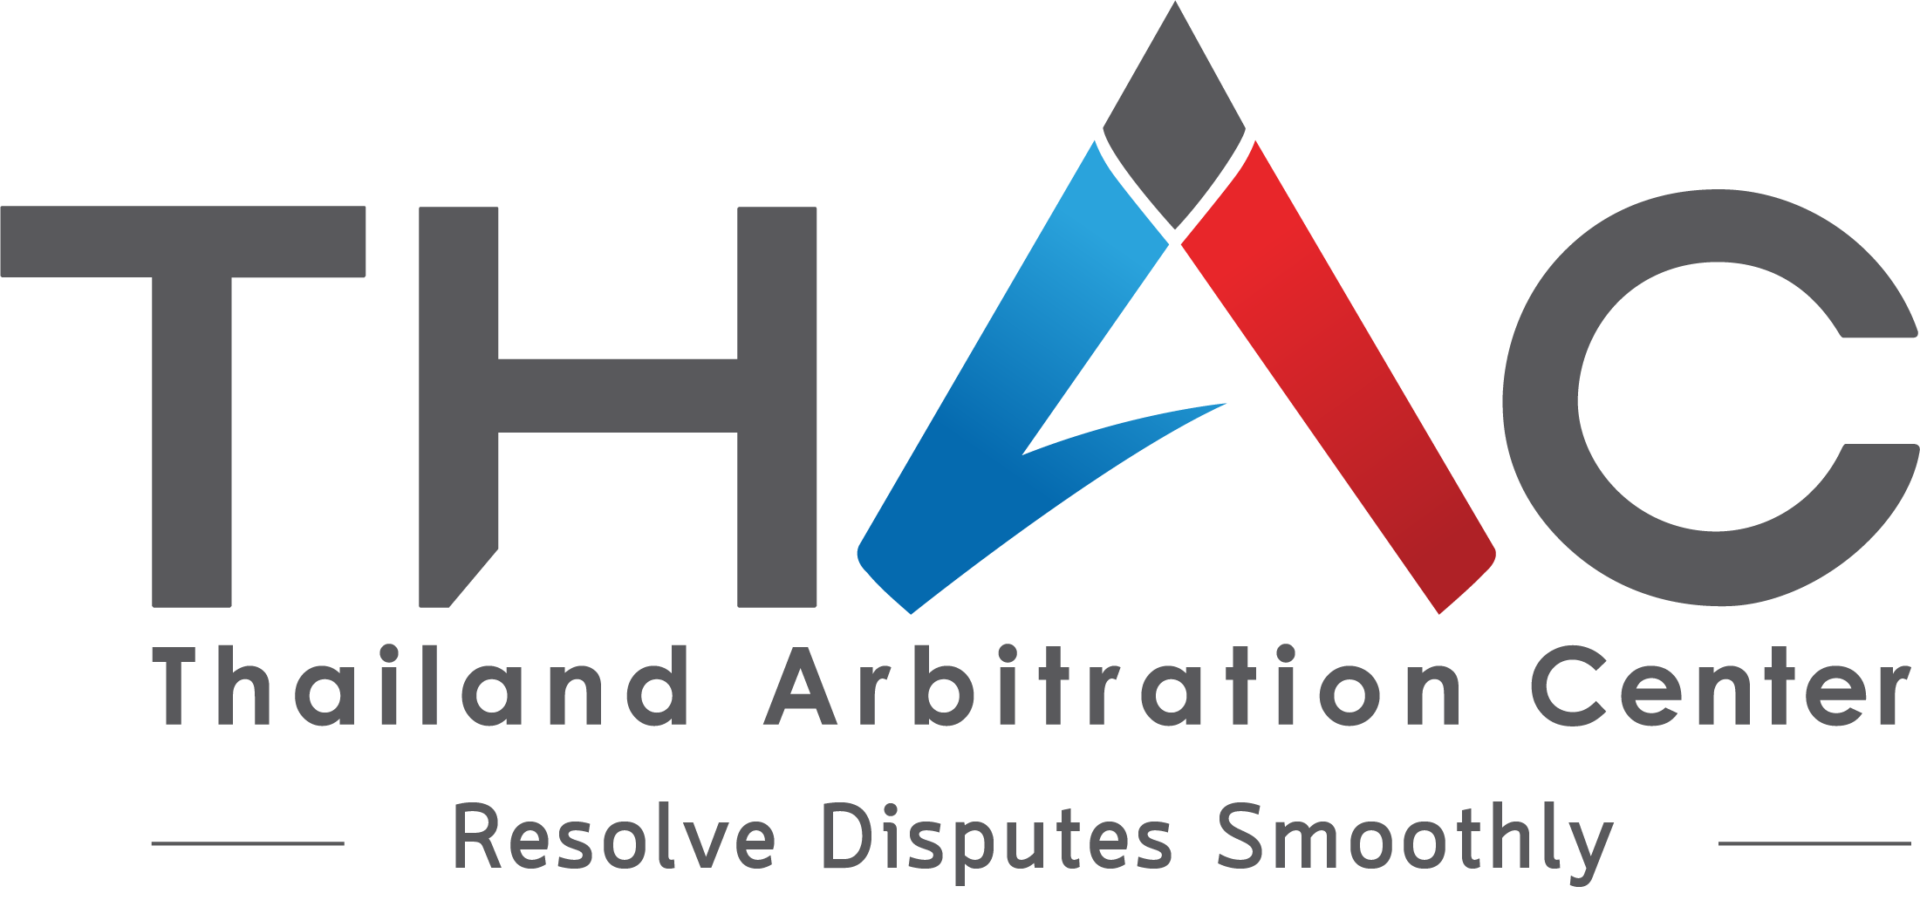 Thailand Arbitration Center (THAC)  - Resolve Disputes Smoothly